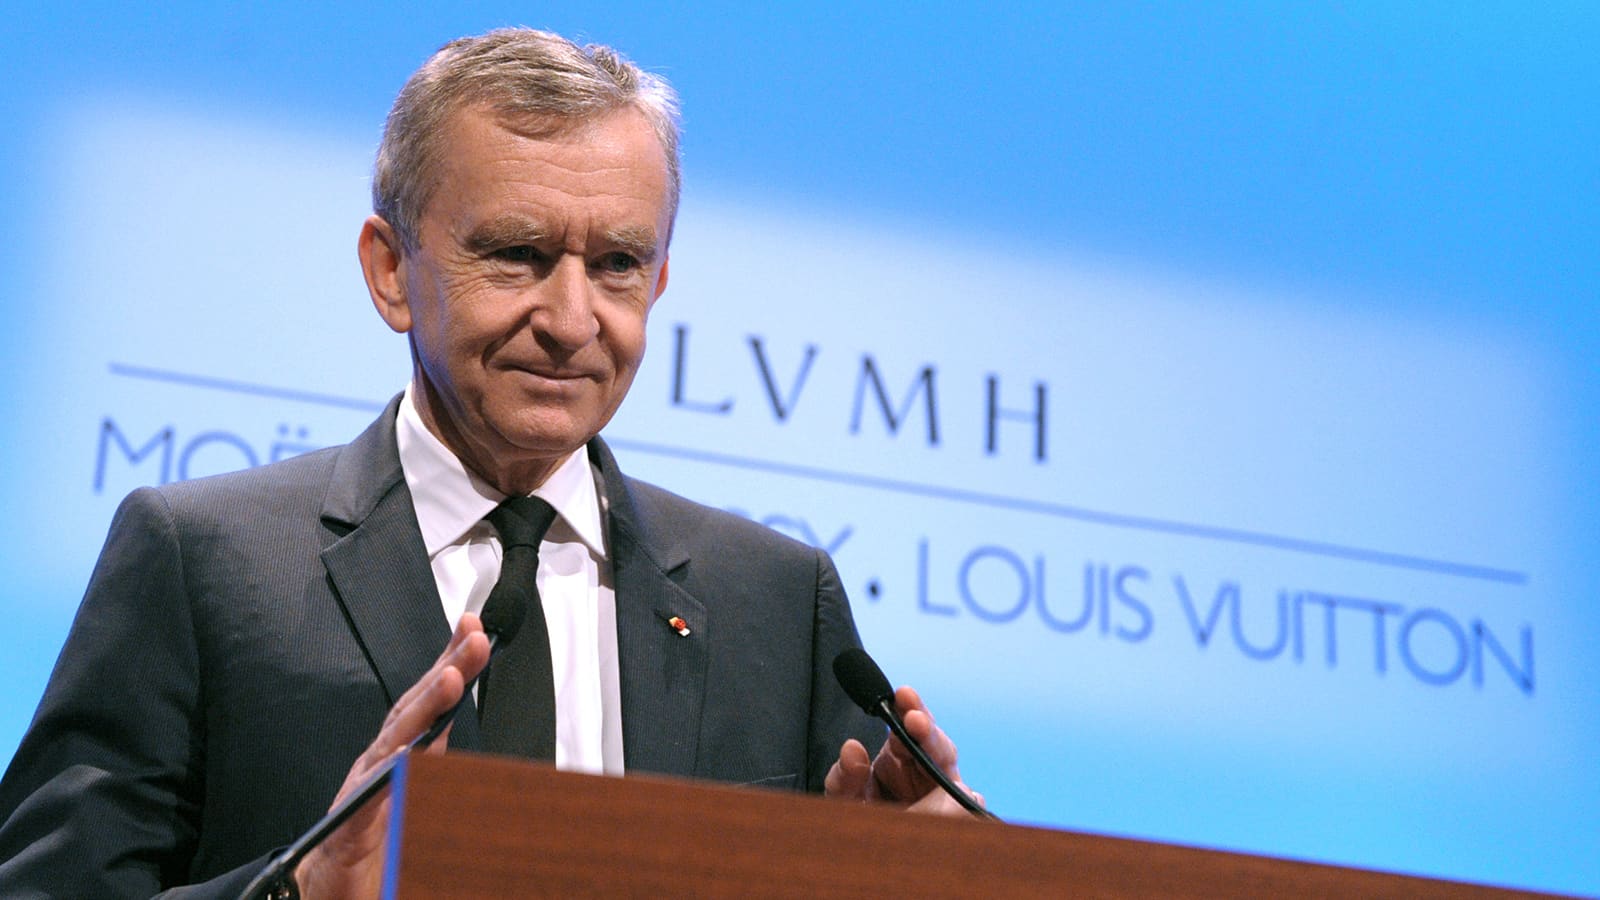 Meet Bernard Arnault, the richest man in the world and the owner of Louis  Vuitton